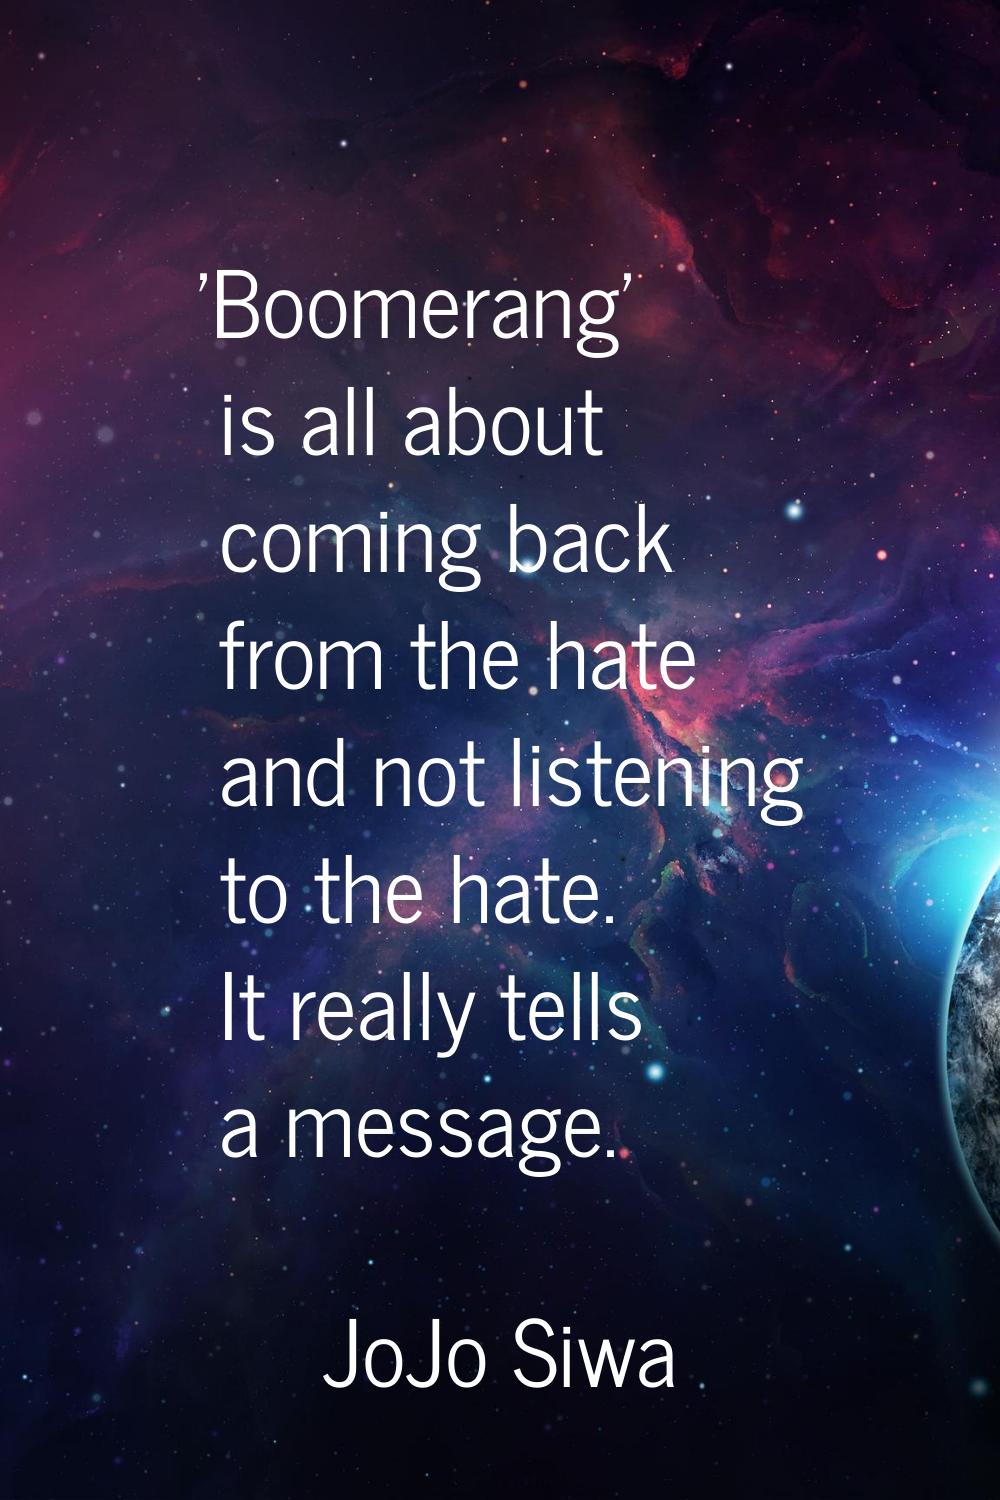 'Boomerang' is all about coming back from the hate and not listening to the hate. It really tells a